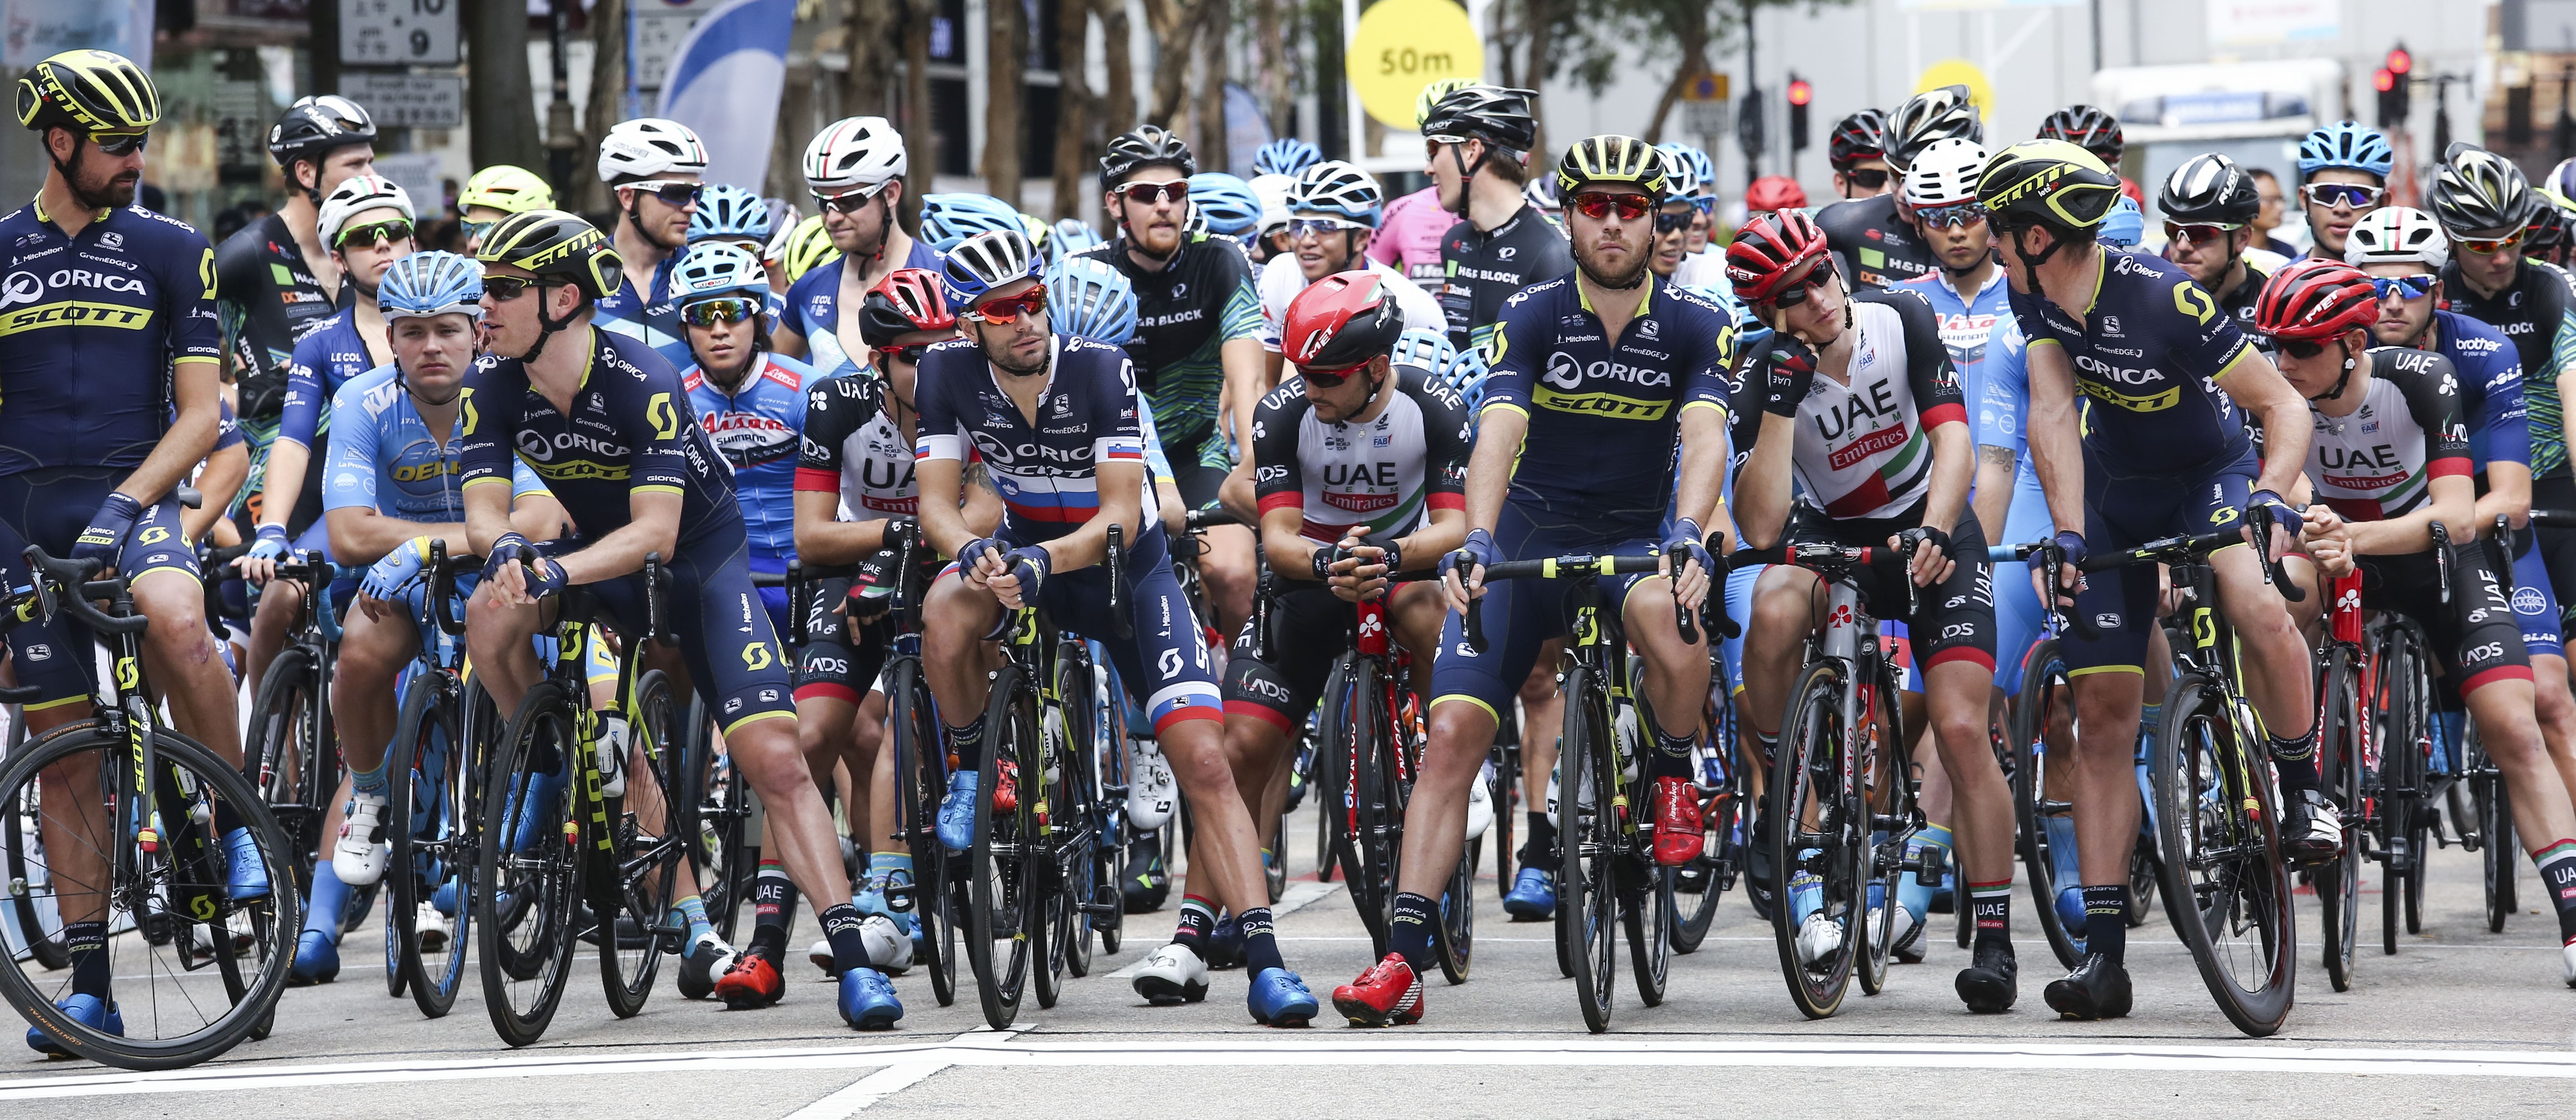 Riders gather for the start of Sunday’s Hong Kong Challenge criterium race. Photo: Jonathan Wong